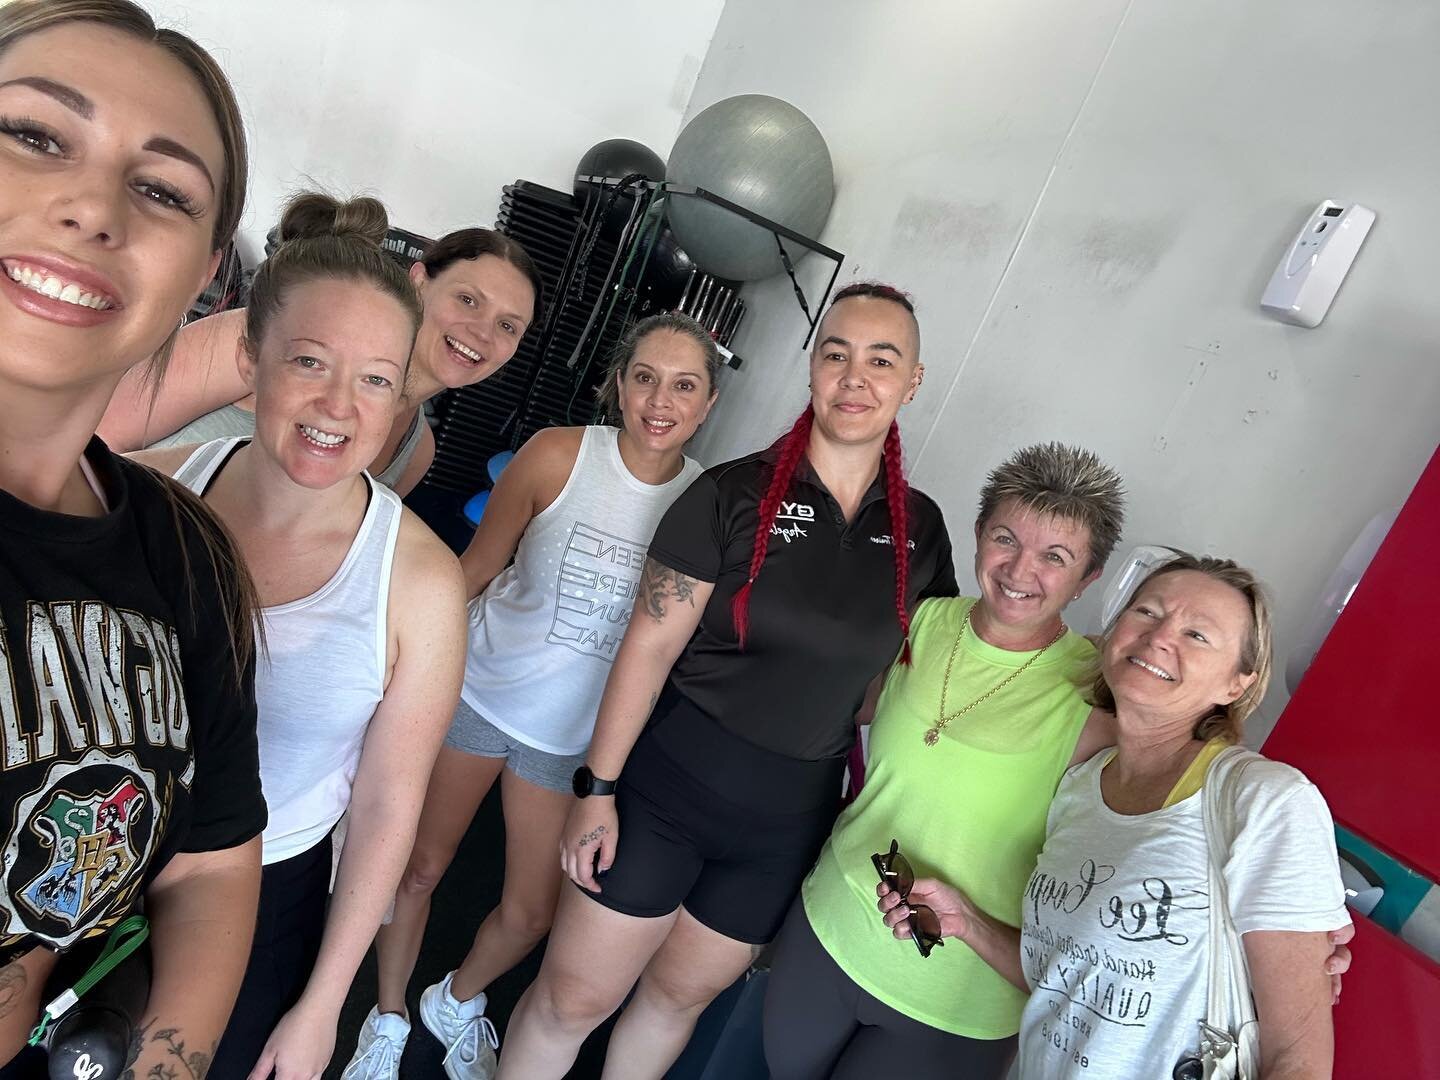 Group Fitness has been a MASSIVE part of GYM4 over the past 40 year❤️

Group Fitness and its instructors have provided such an AMAZING and STRONG community with our members and continue to do so!🏋️&zwj;♂️😍

In celebration of the 40 years worth of G